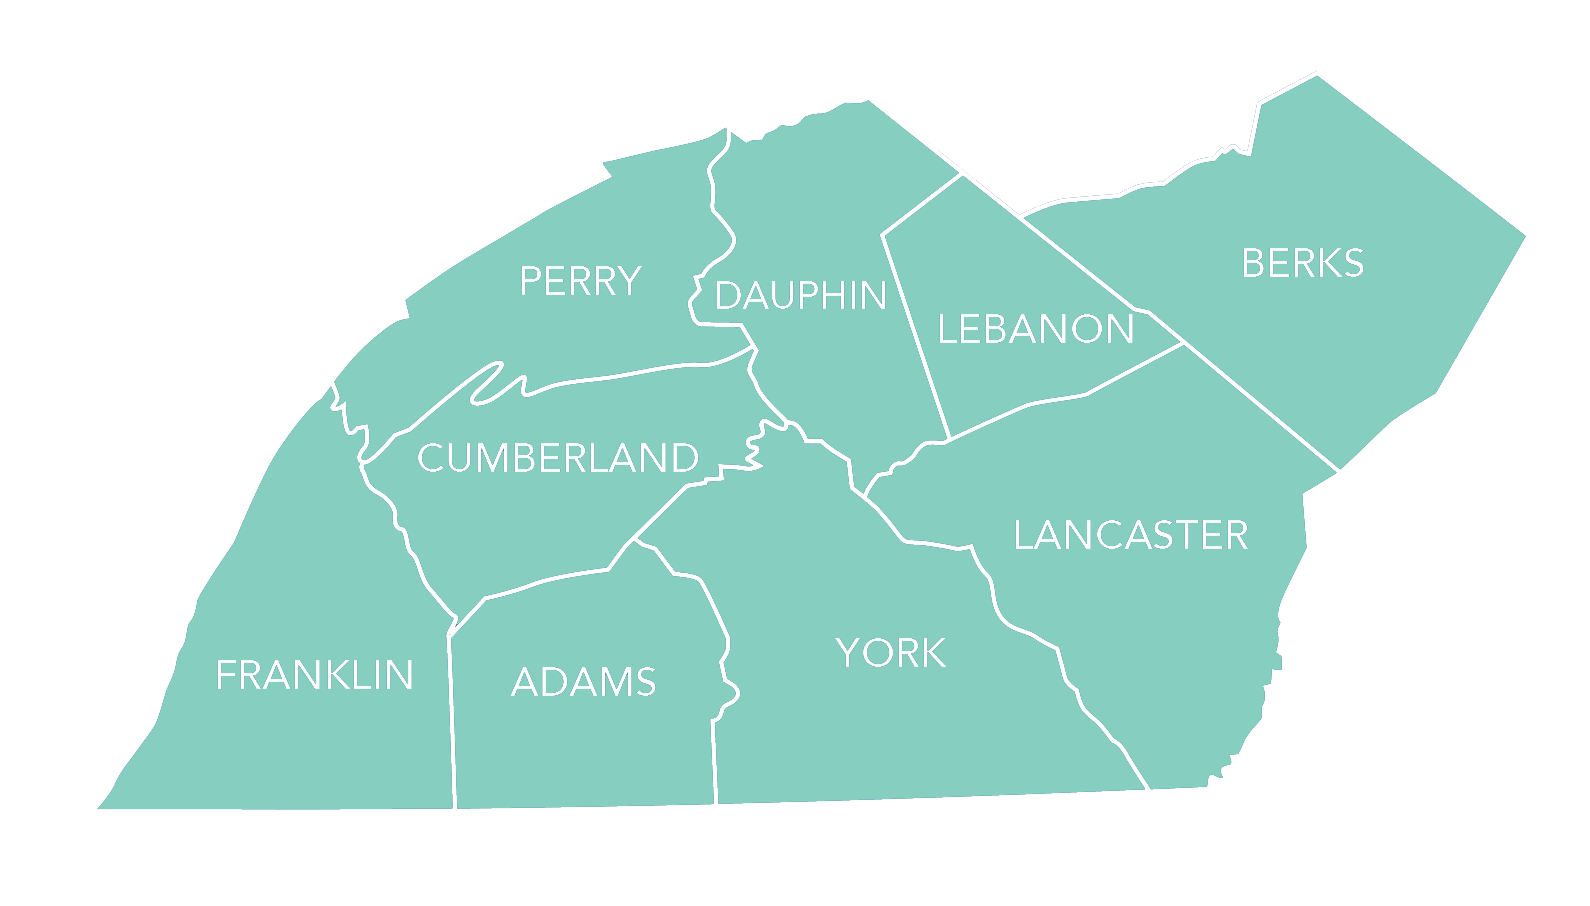 PA Commute service map with counties